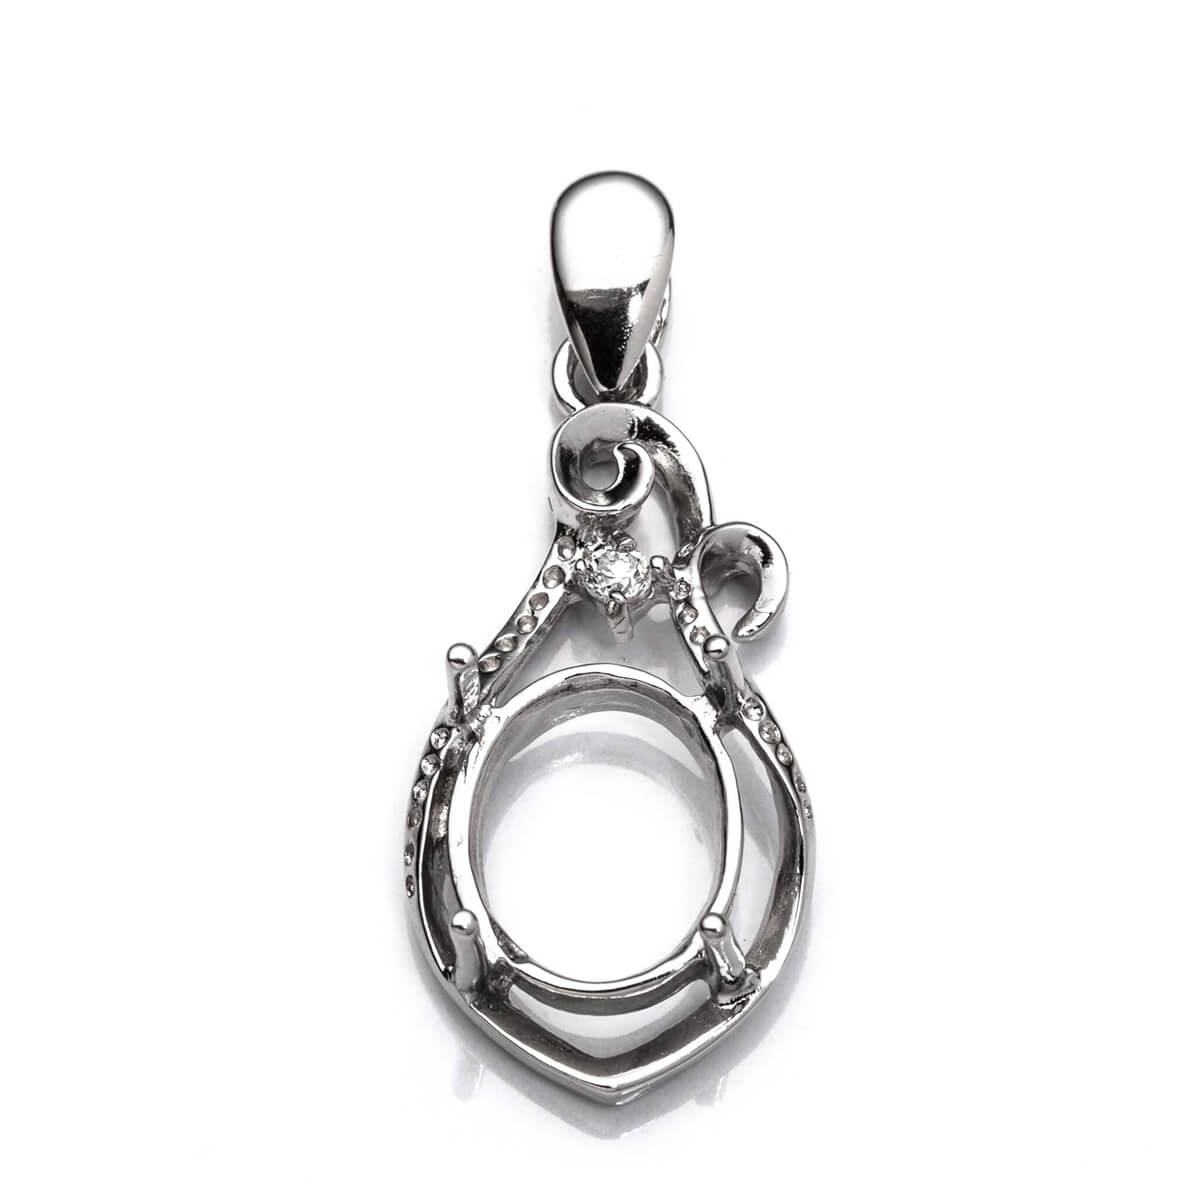 Pear Pendant with Cubic Zirconia Inlays and Oval Mounting and Bail in Sterling Silver 9x11mm